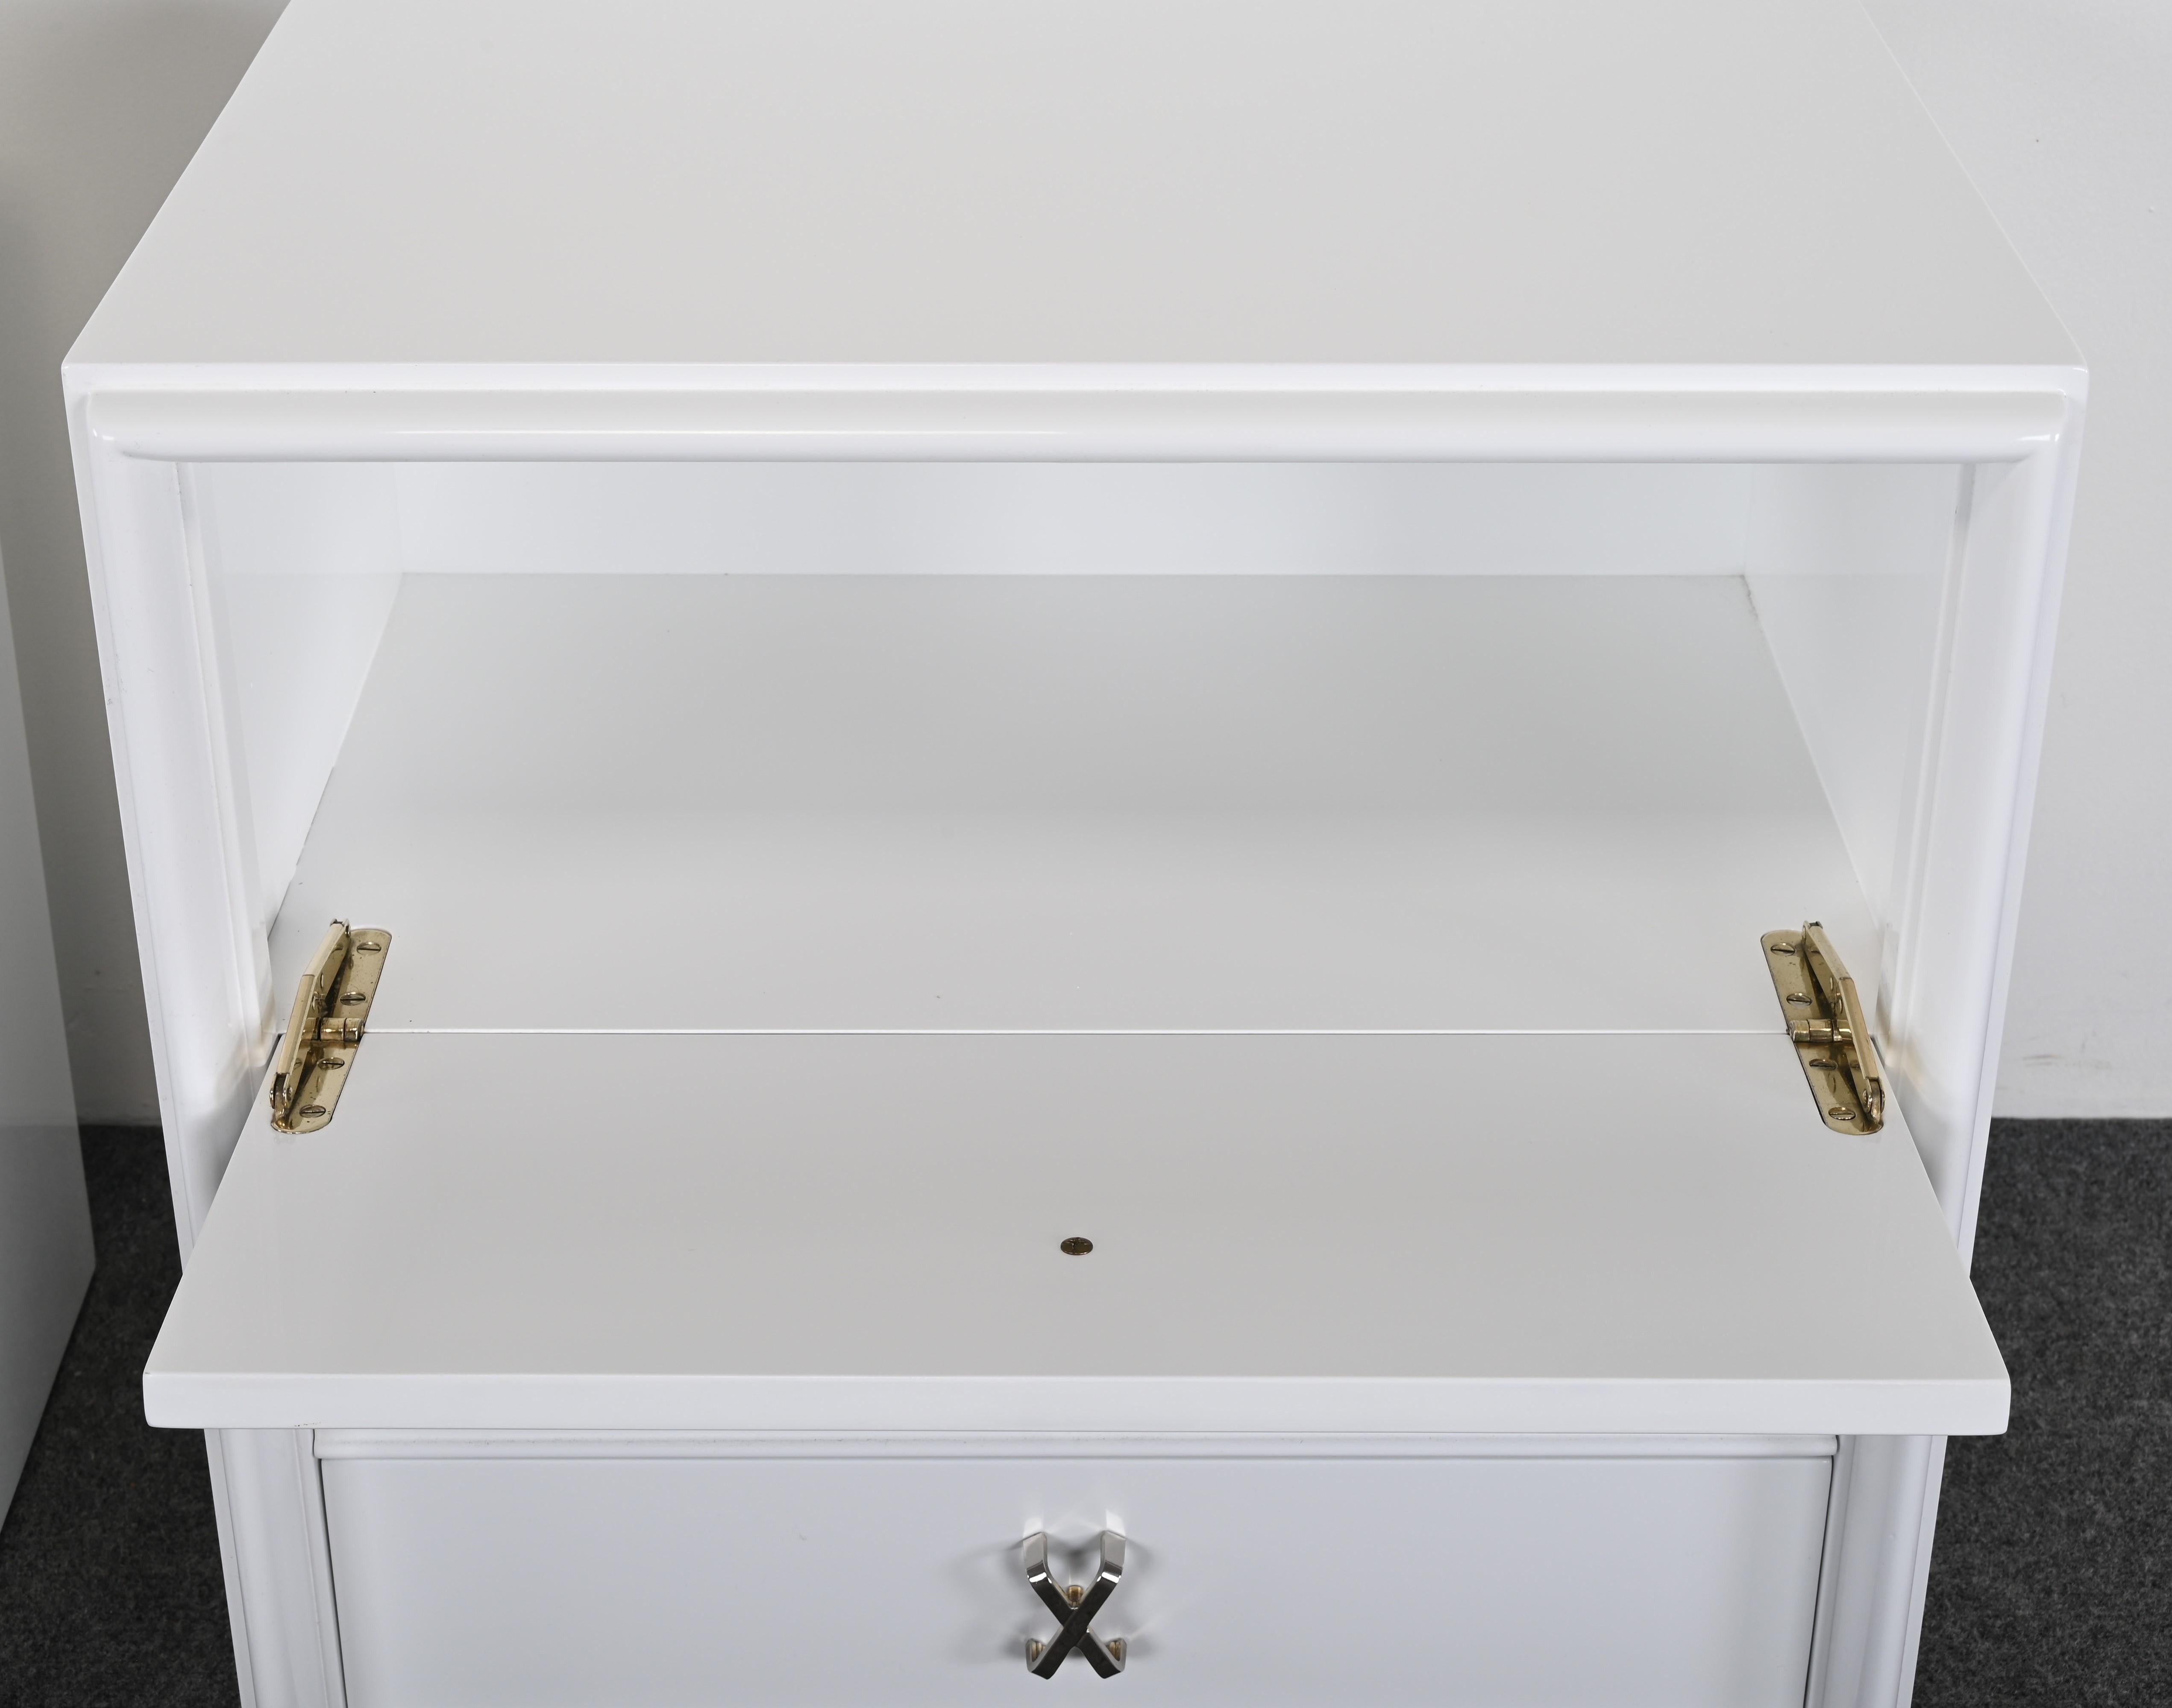 Pair of Bedside Tables with Silver X-Pulls by Paul Frankl, 1950 For Sale 5